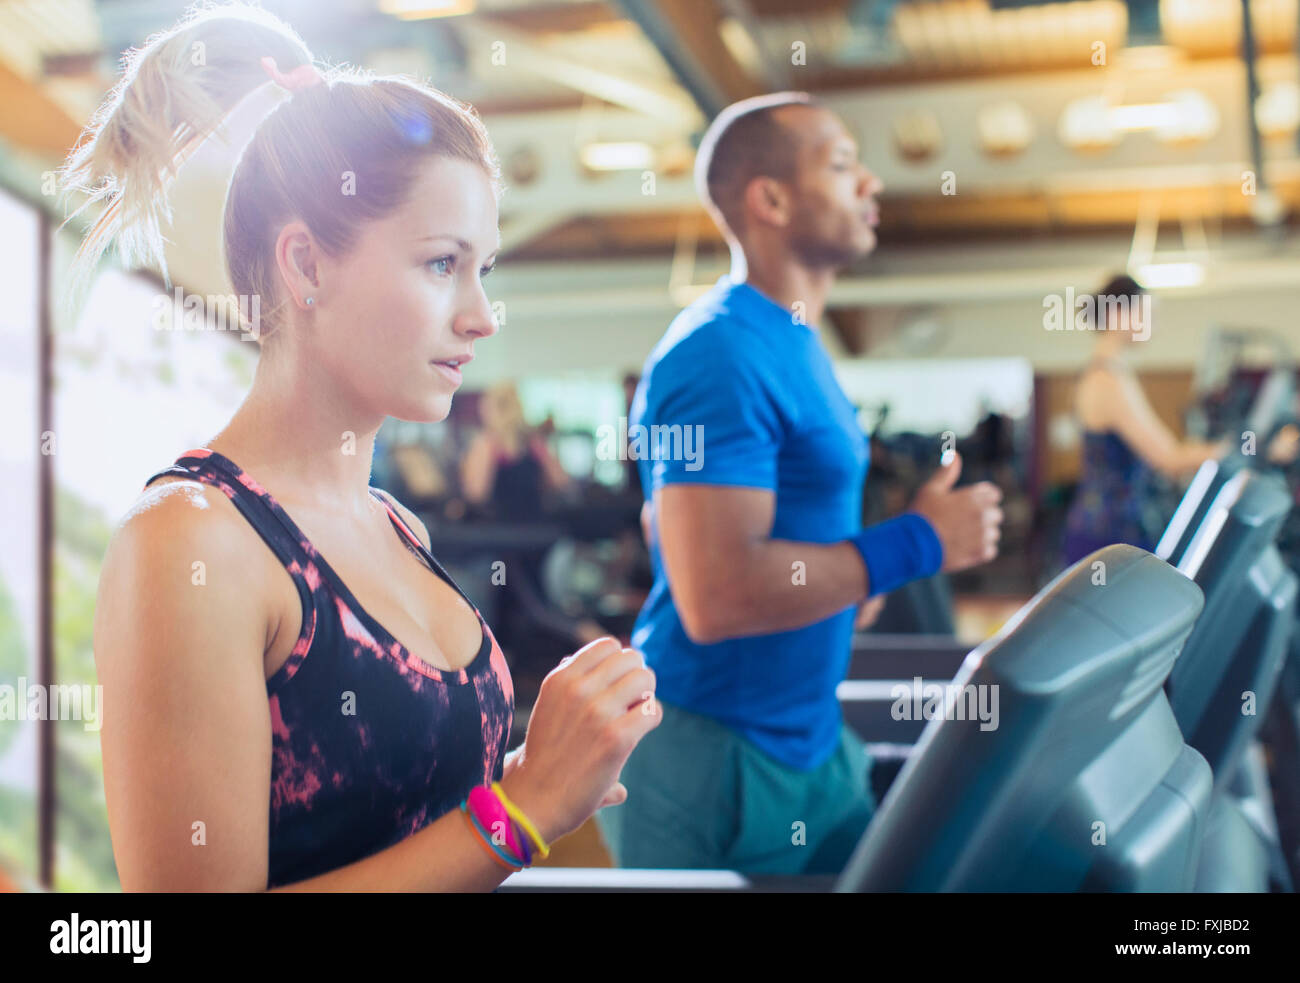 Focused woman running on treadmill at gym Stock Photo